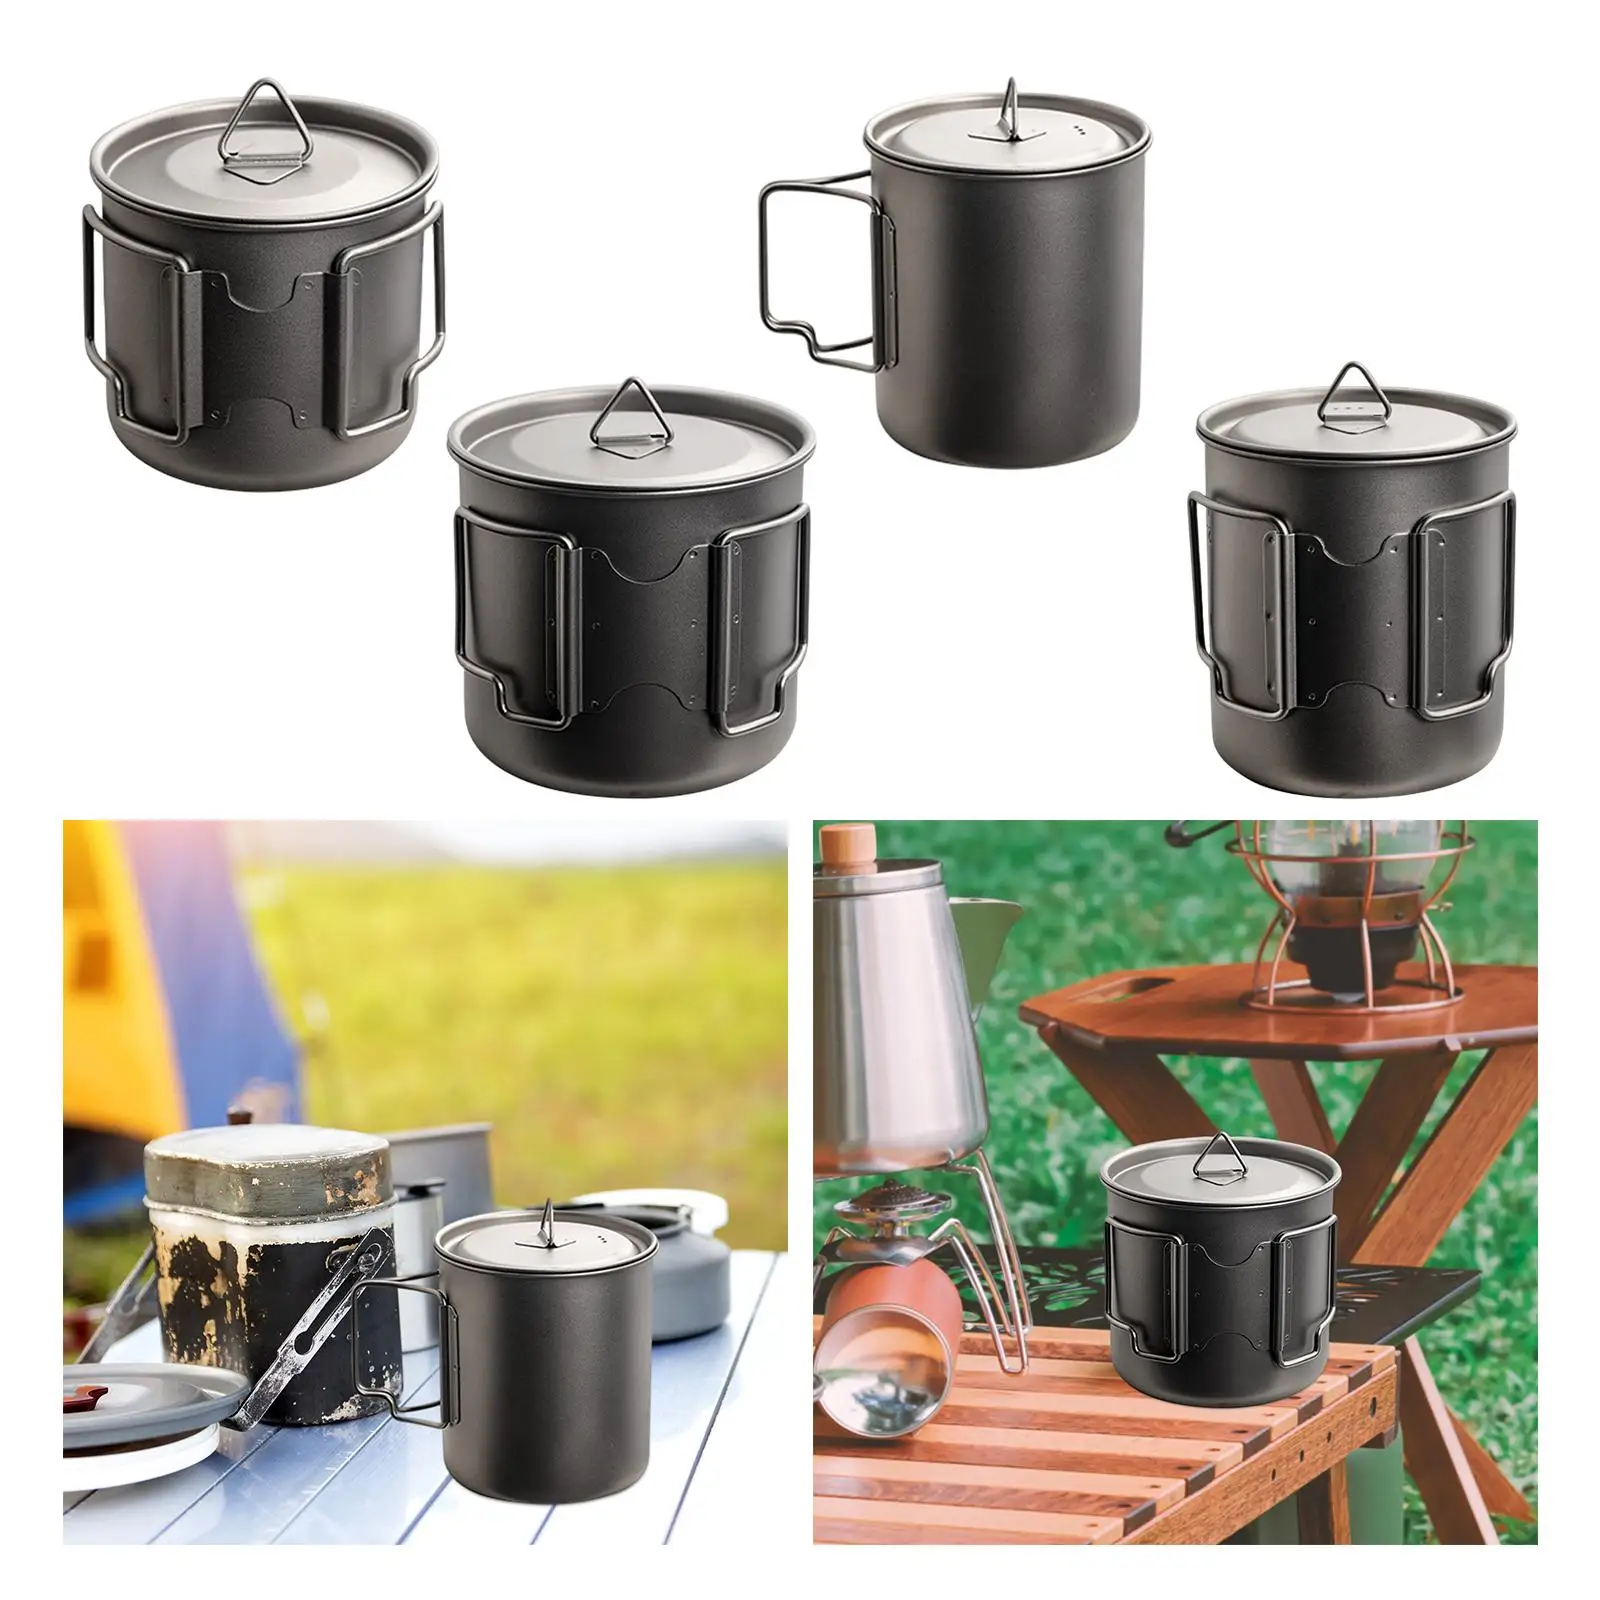 Titanium Water Cup Cookware Camping Tea Coffee Mug for Hiking Outdoor Picnic